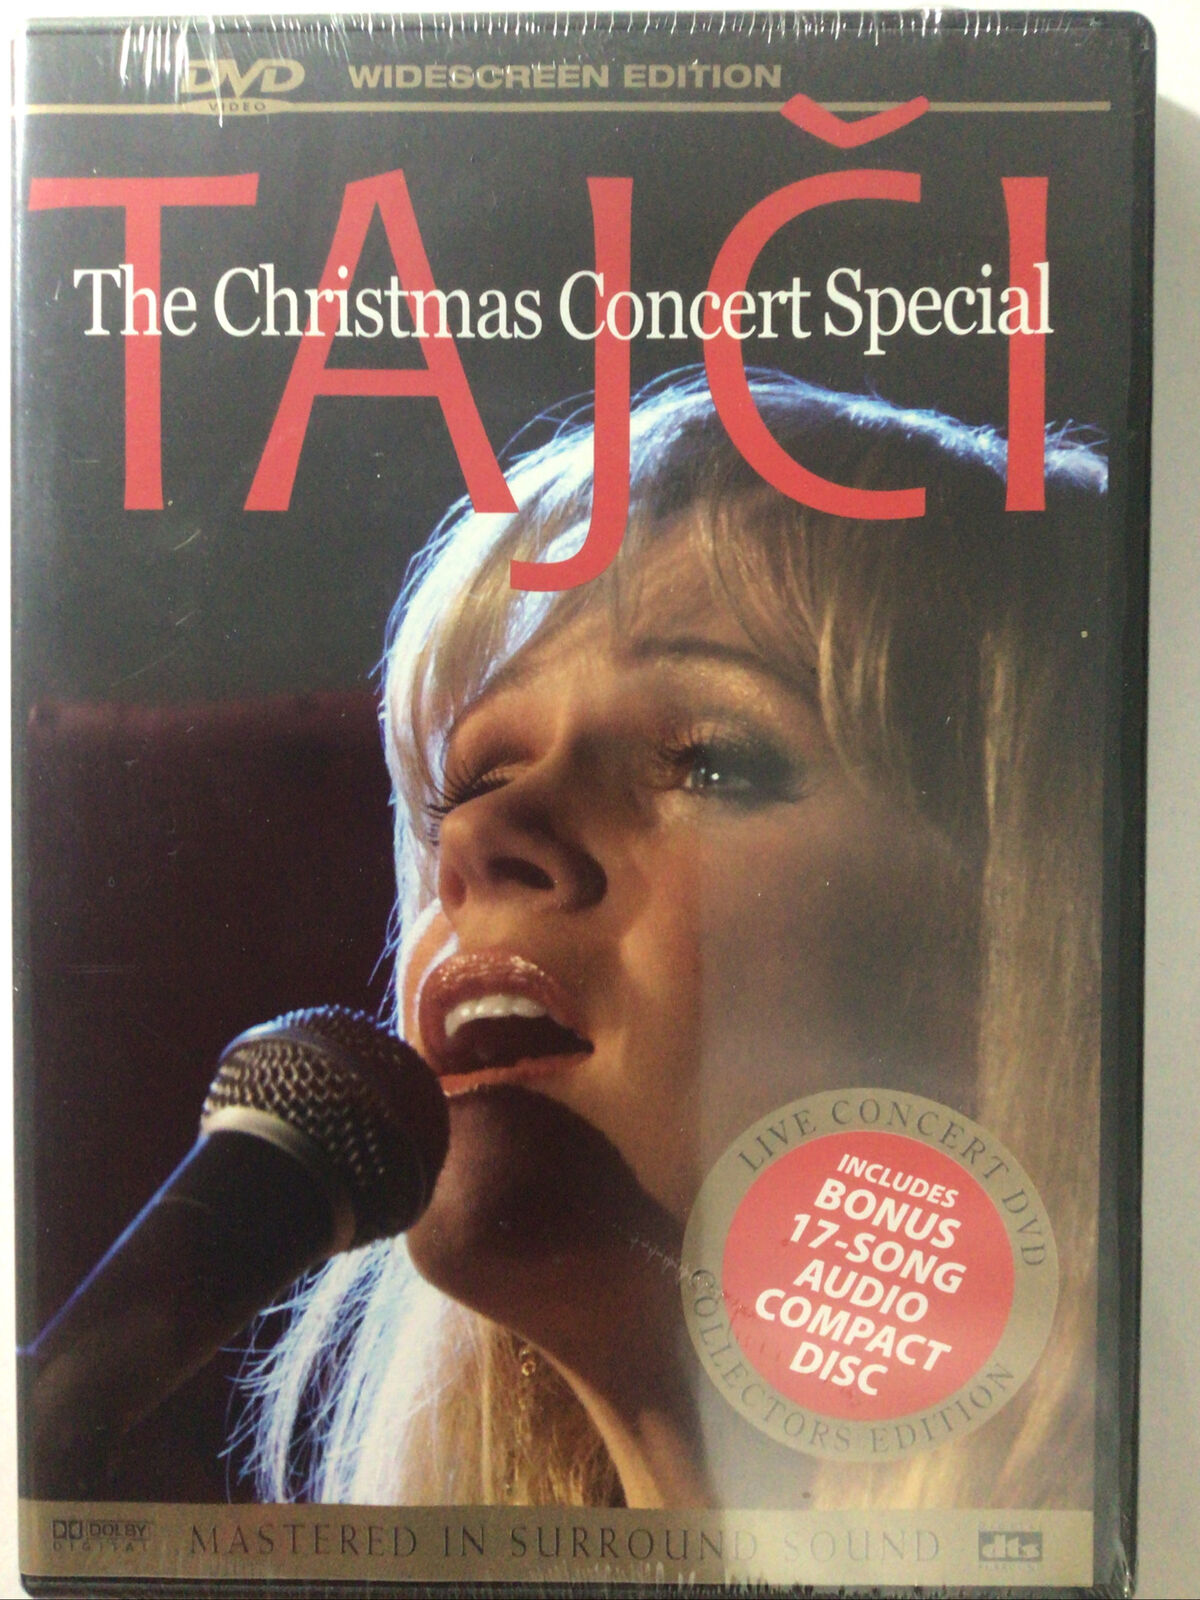 Tajci: The Christmas Concert Special - NEW - 